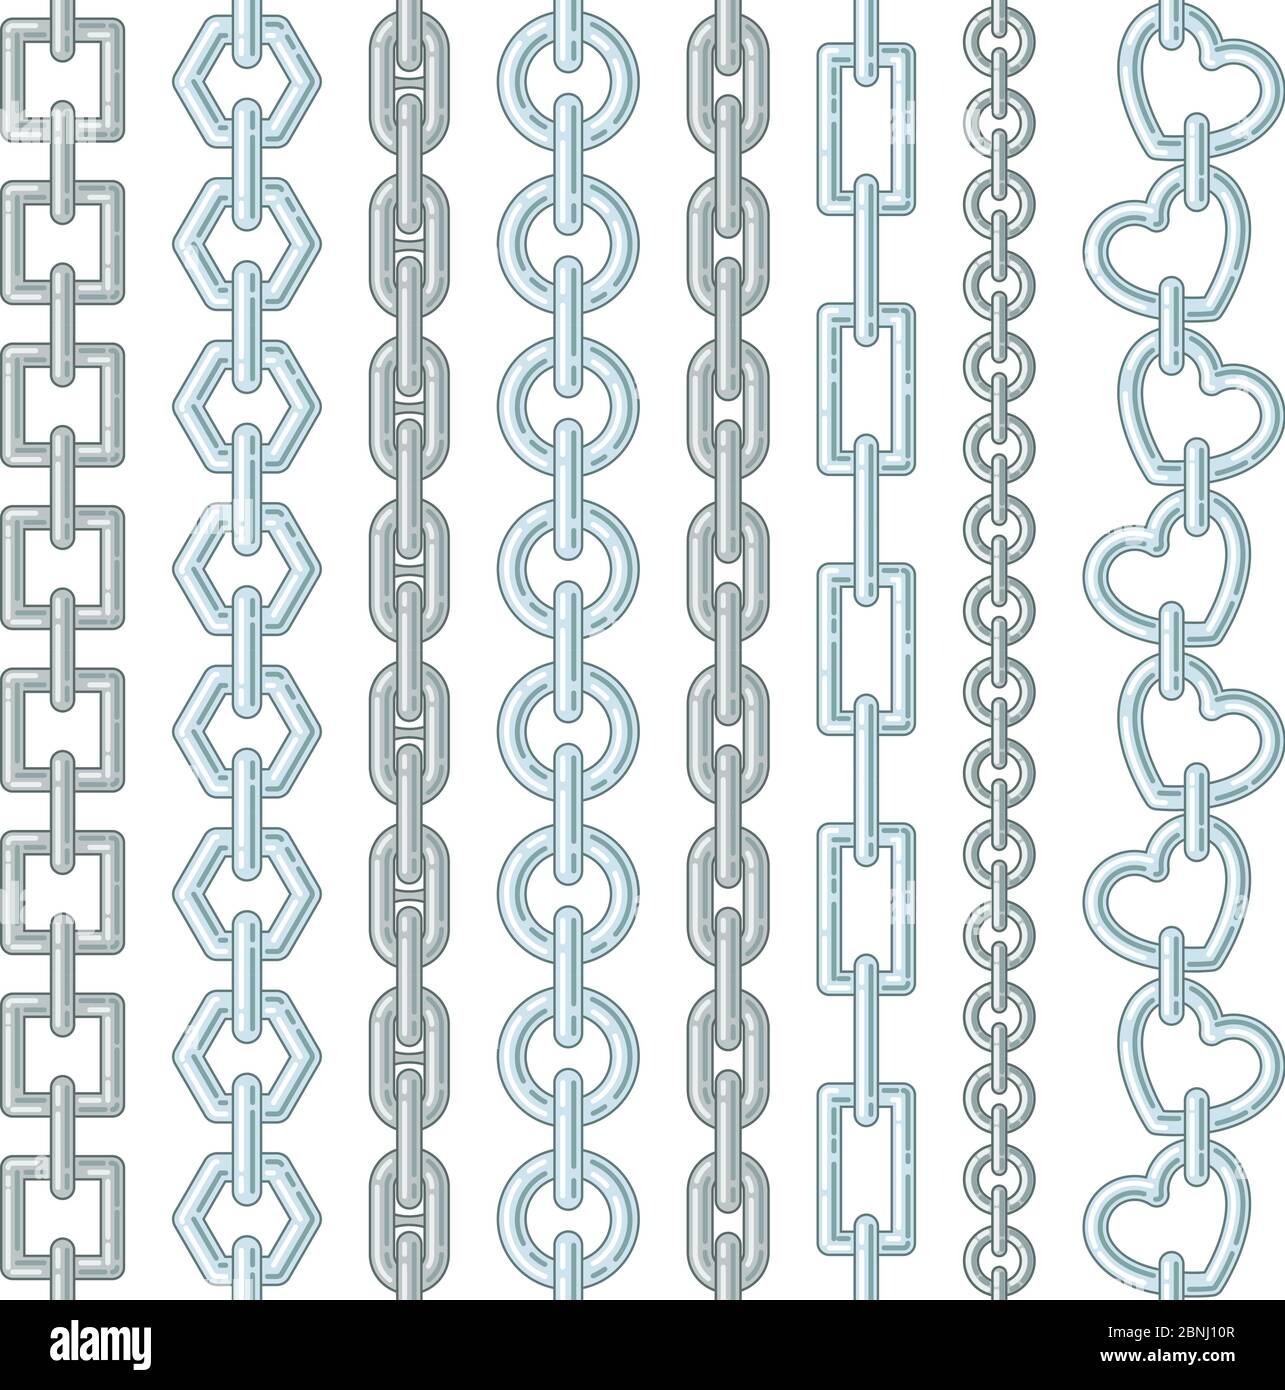 217,478 Metal Chain Isolated Images, Stock Photos, 3D objects, & Vectors